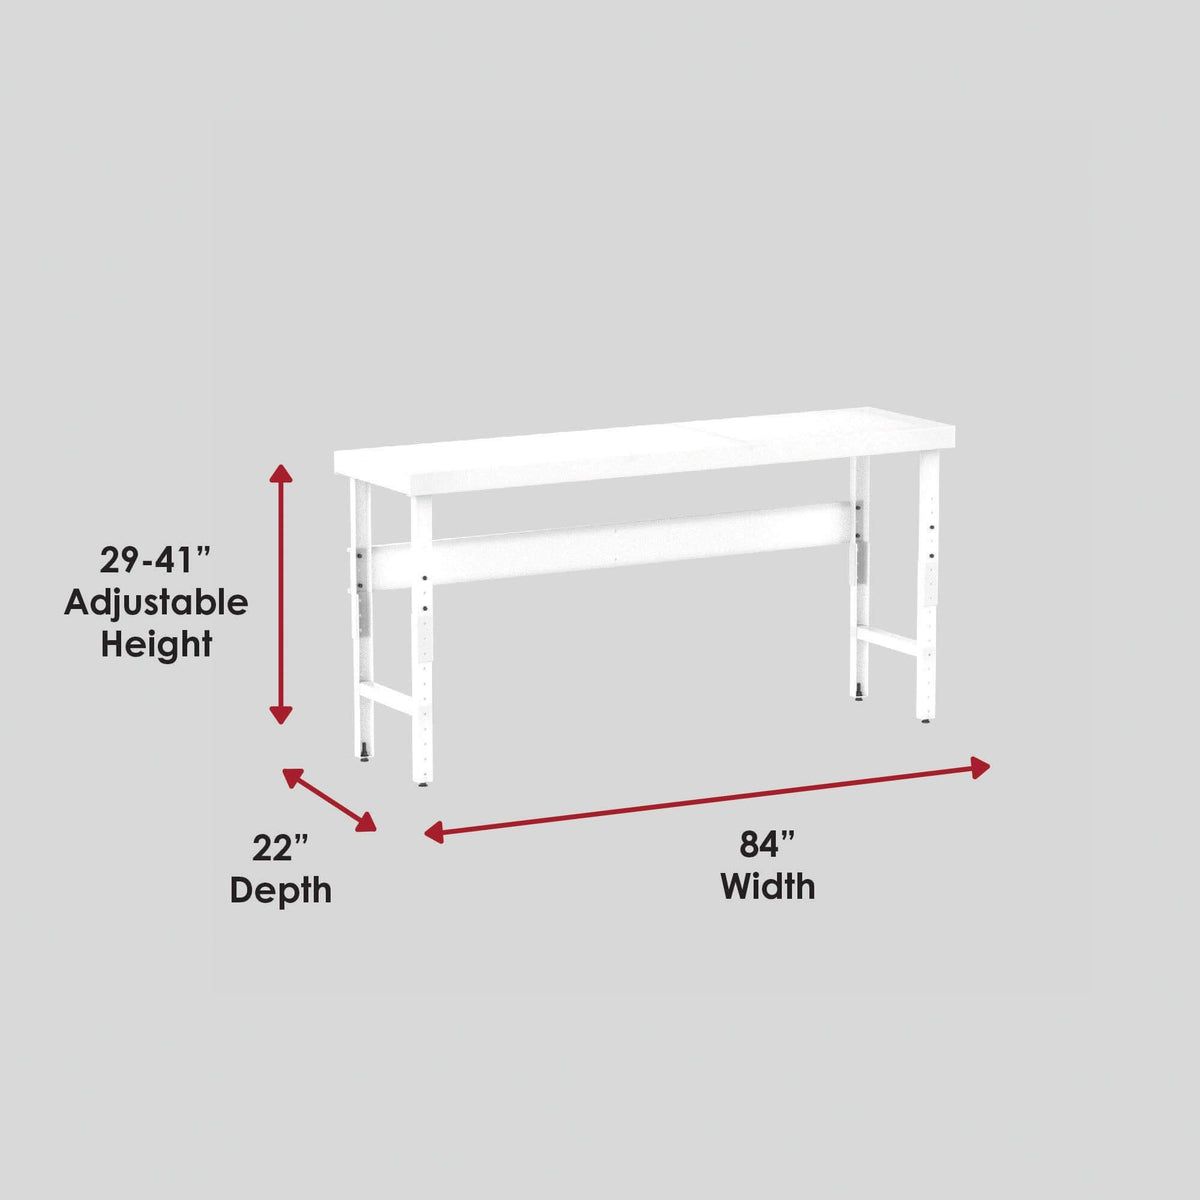 Valley Craft Adjustable Height Work Tables